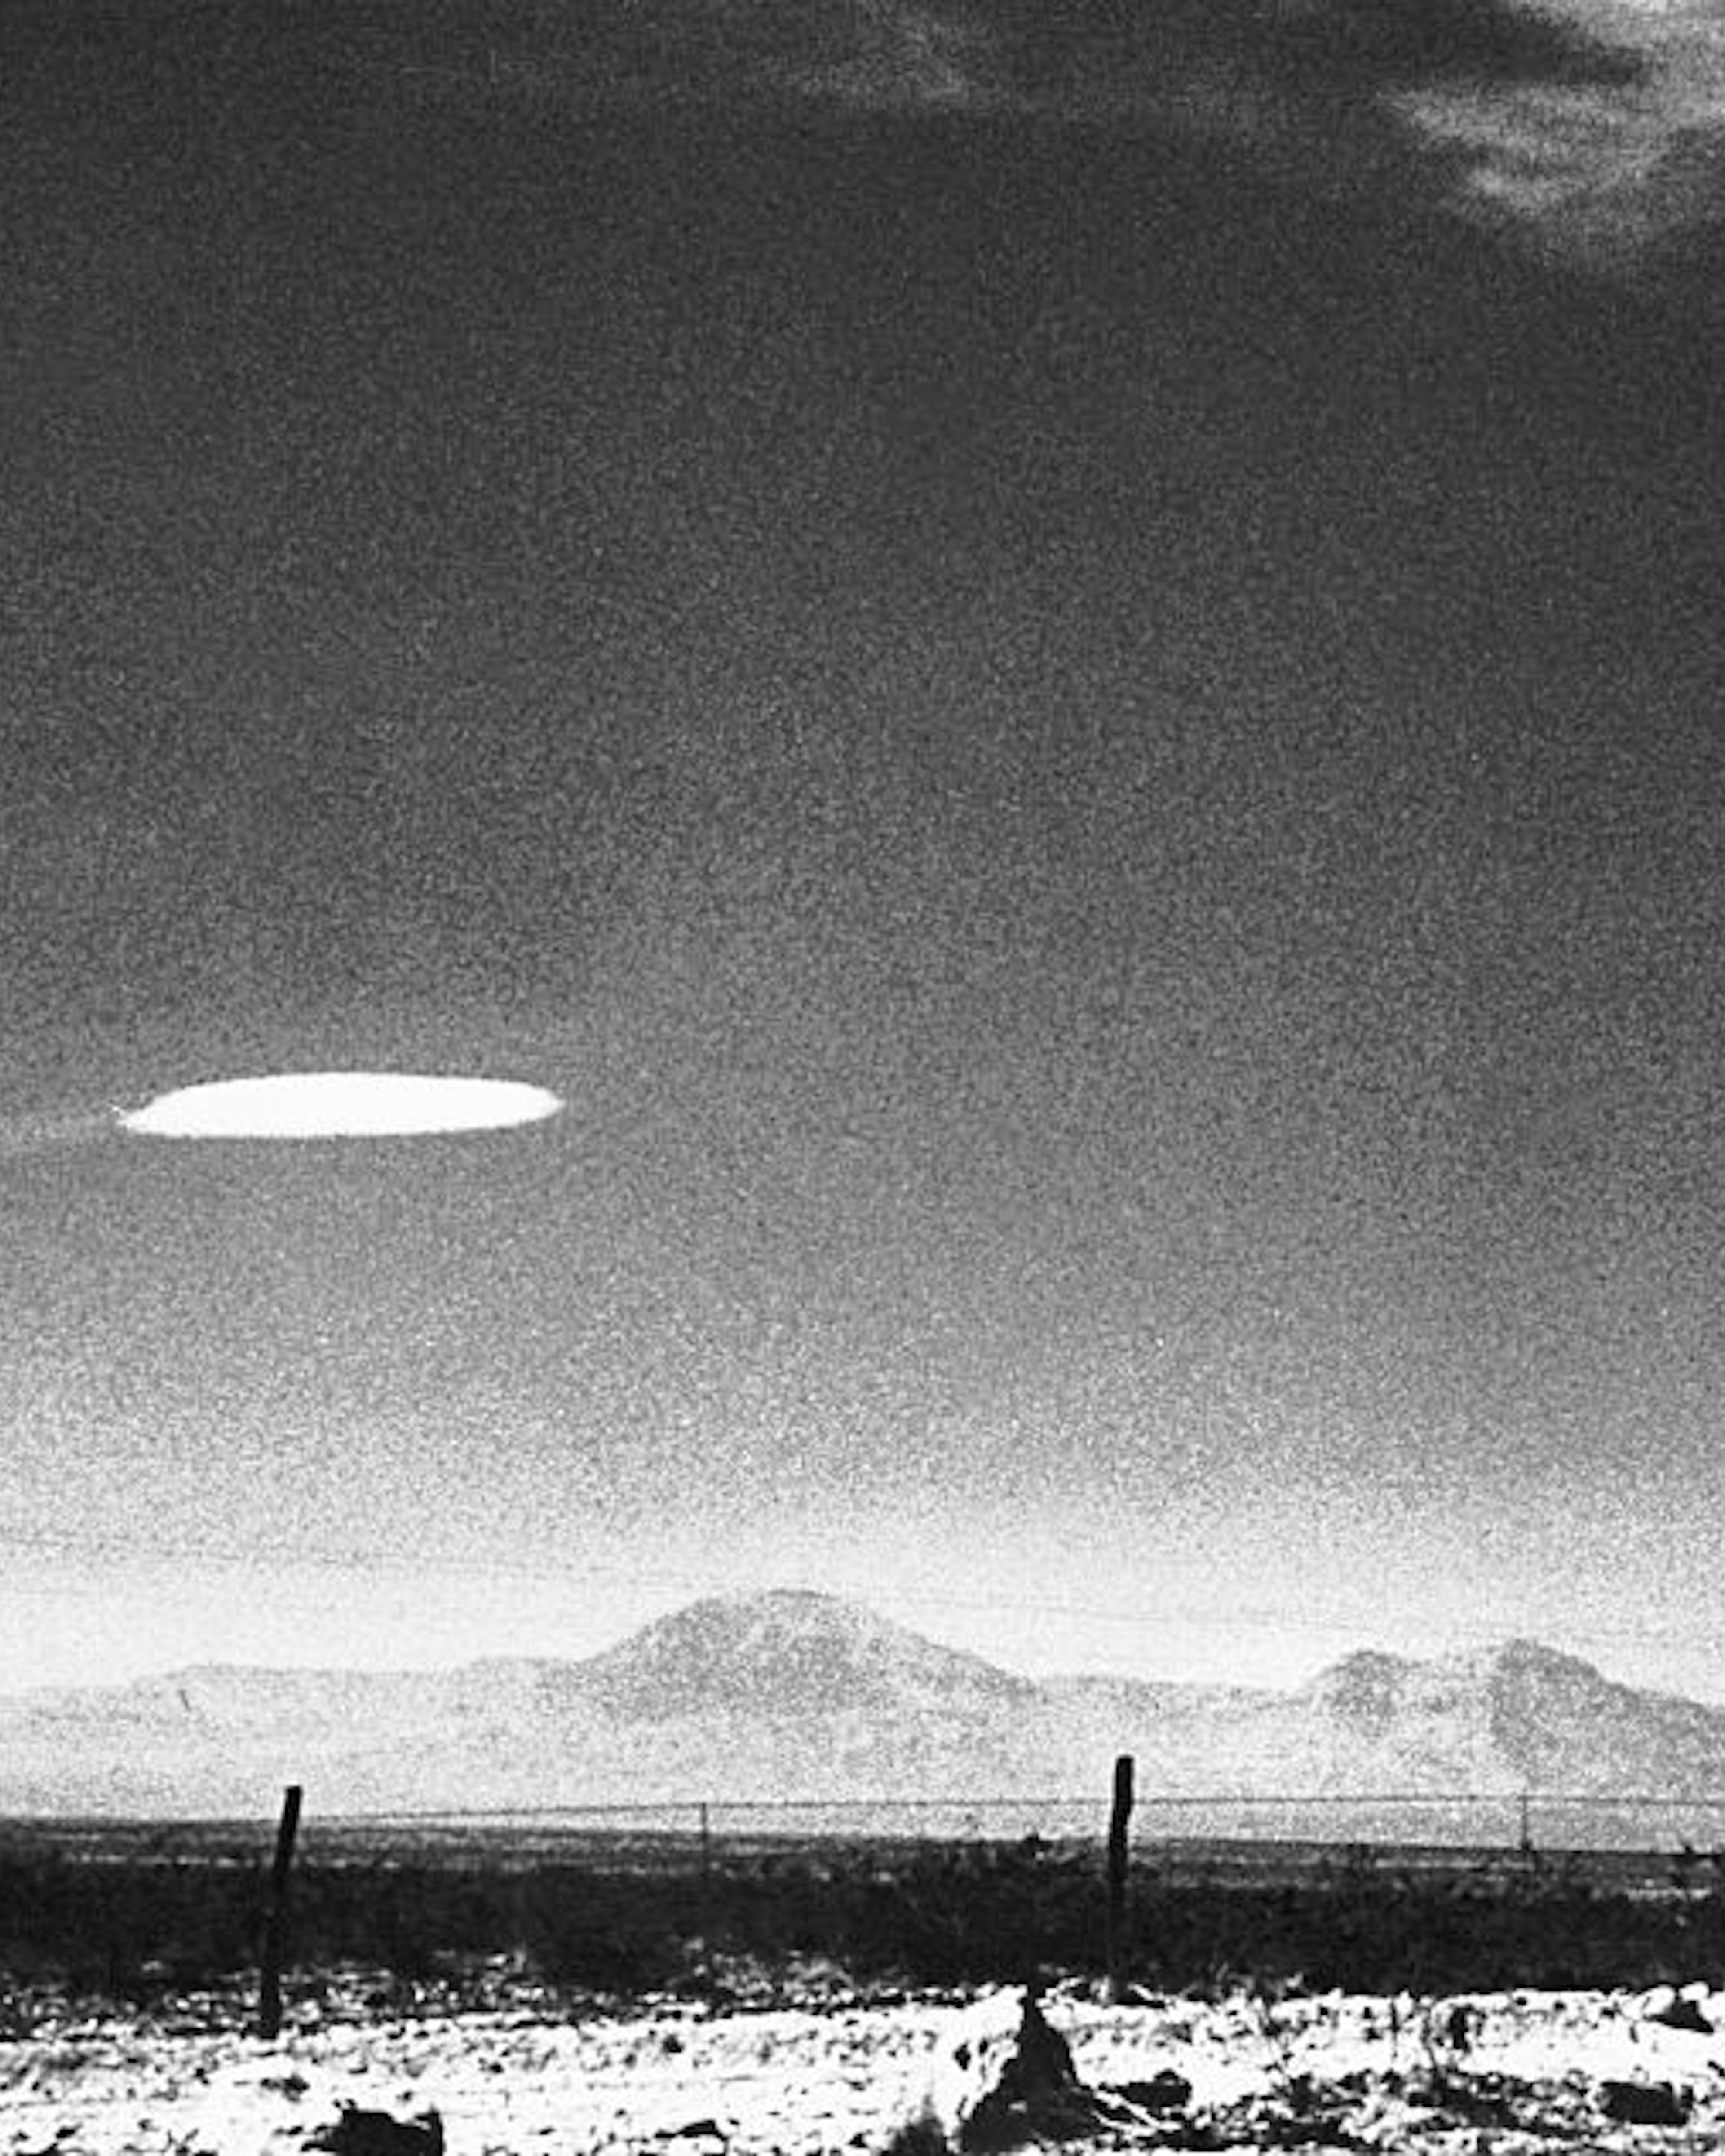 A UFO variety was photographed when it hovered for fifteen minutes near Holloman Air Development Center in New Mexico. The object was photographed by a government employee and was released by the Aerial Phenomena Research Organization after careful study. There is no conventional explanation for the object.